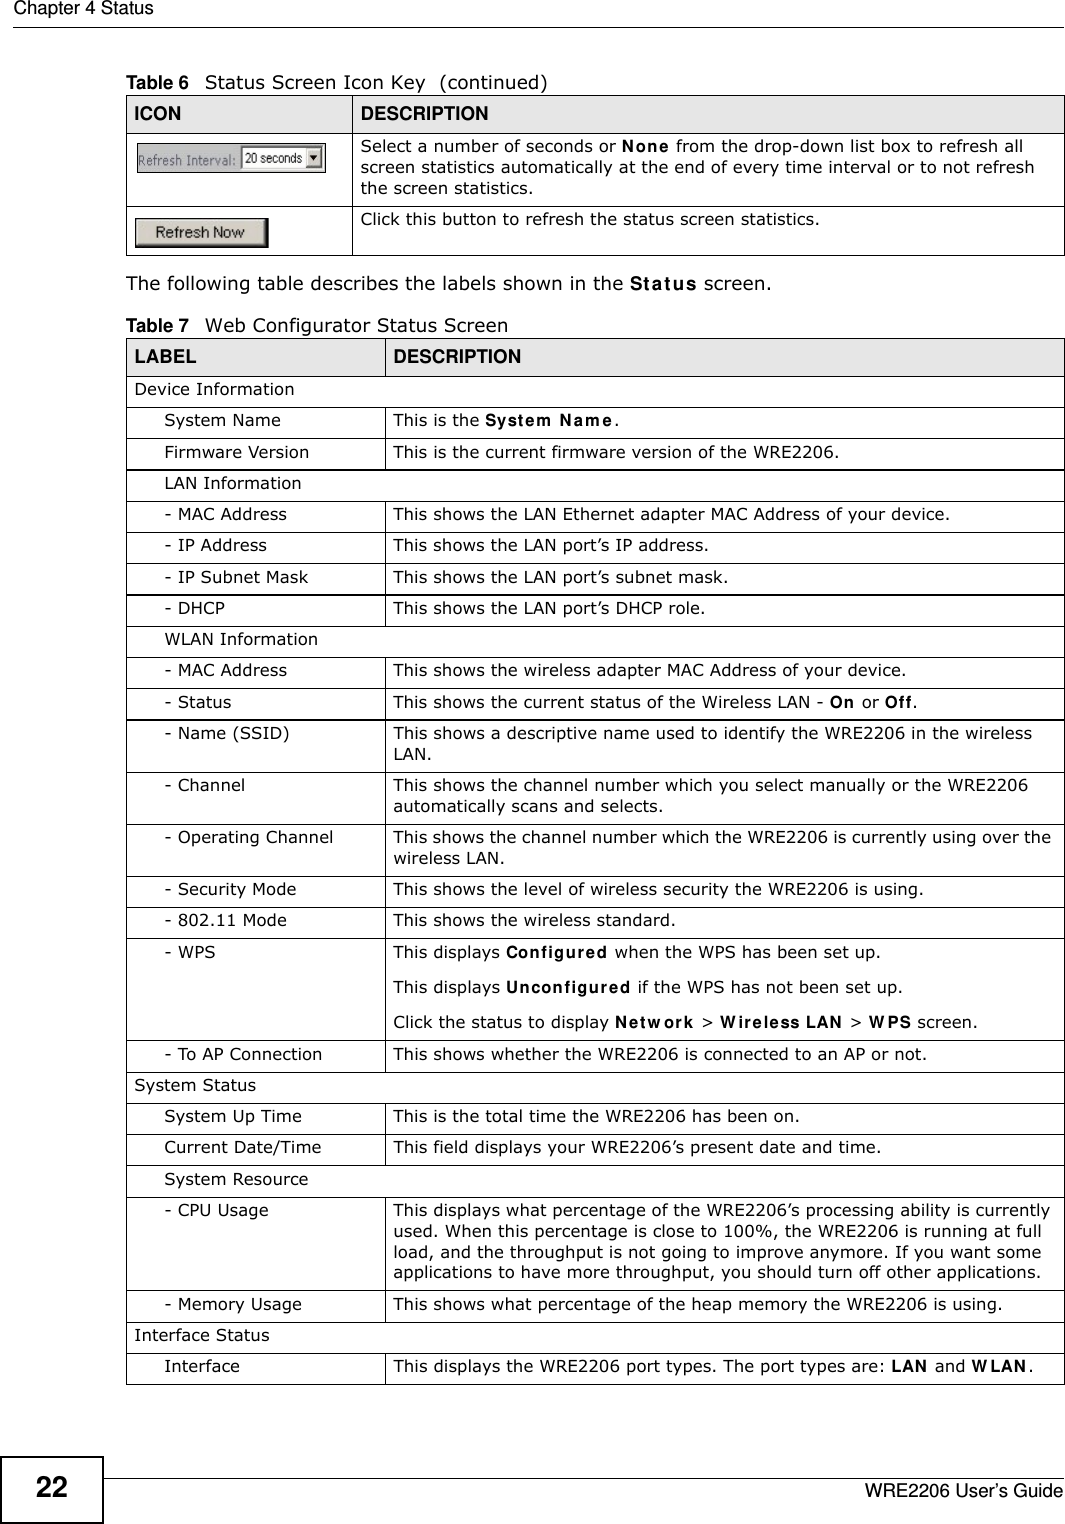 Chapter 4 StatusWRE2206 User’s Guide22The following table describes the labels shown in the St a t us screen.Select a number of seconds or N o ne  from the drop-down list box to refresh all screen statistics automatically at the end of every time interval or to not refresh the screen statistics.Click this button to refresh the status screen statistics.Table 7   Web Configurator Status Screen  LABEL DESCRIPTIONDevice InformationSystem Name This is the Syste m  N am e .Firmware Version This is the current firmware version of the WRE2206. LAN Information- MAC Address This shows the LAN Ethernet adapter MAC Address of your device.- IP Address This shows the LAN port’s IP address.- IP Subnet Mask This shows the LAN port’s subnet mask.- DHCP This shows the LAN port’s DHCP role.WLAN Information- MAC Address This shows the wireless adapter MAC Address of your device.- Status This shows the current status of the Wireless LAN - On or Off.- Name (SSID) This shows a descriptive name used to identify the WRE2206 in the wireless LAN. - Channel This shows the channel number which you select manually or the WRE2206 automatically scans and selects.- Operating Channel This shows the channel number which the WRE2206 is currently using over the wireless LAN. - Security Mode This shows the level of wireless security the WRE2206 is using.- 802.11 Mode This shows the wireless standard.- WPS This displays Configur ed when the WPS has been set up. This displays Unconfigu r ed if the WPS has not been set up.Click the status to display Net w or k  &gt; W ire le ss LAN  &gt; W PS screen.- To AP Connection This shows whether the WRE2206 is connected to an AP or not.System StatusSystem Up Time This is the total time the WRE2206 has been on.Current Date/Time This field displays your WRE2206’s present date and time.System Resource- CPU Usage This displays what percentage of the WRE2206’s processing ability is currently used. When this percentage is close to 100%, the WRE2206 is running at full load, and the throughput is not going to improve anymore. If you want some applications to have more throughput, you should turn off other applications.- Memory Usage This shows what percentage of the heap memory the WRE2206 is using. Interface StatusInterface This displays the WRE2206 port types. The port types are: LAN  and W LAN .Table 6   Status Screen Icon Key  (continued)ICON DESCRIPTION